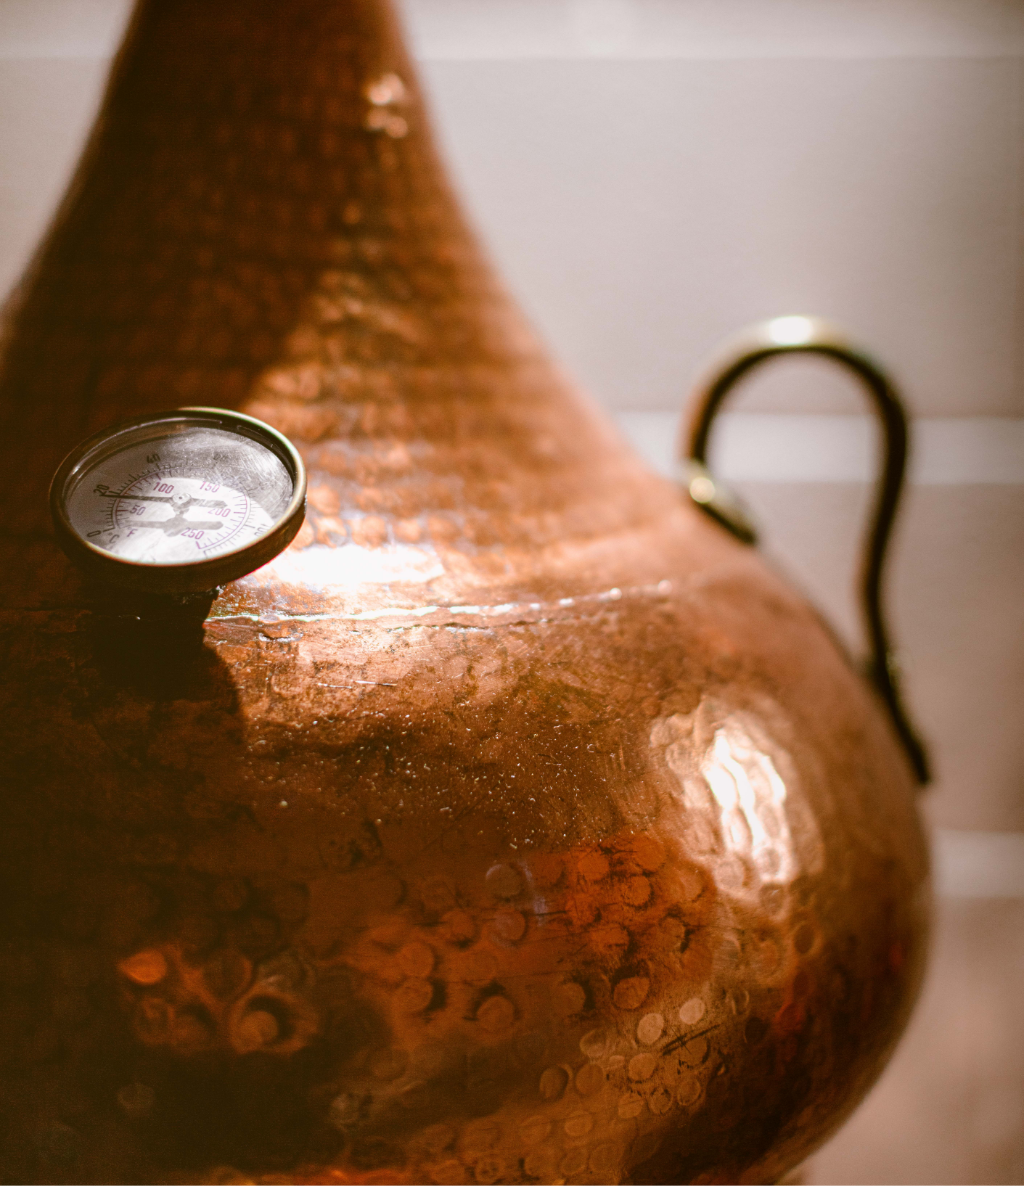 Exeter Gin Copper Still used to make small batch gin at the distillery. You will see them when you book and come to the gin school or gin tasting. 